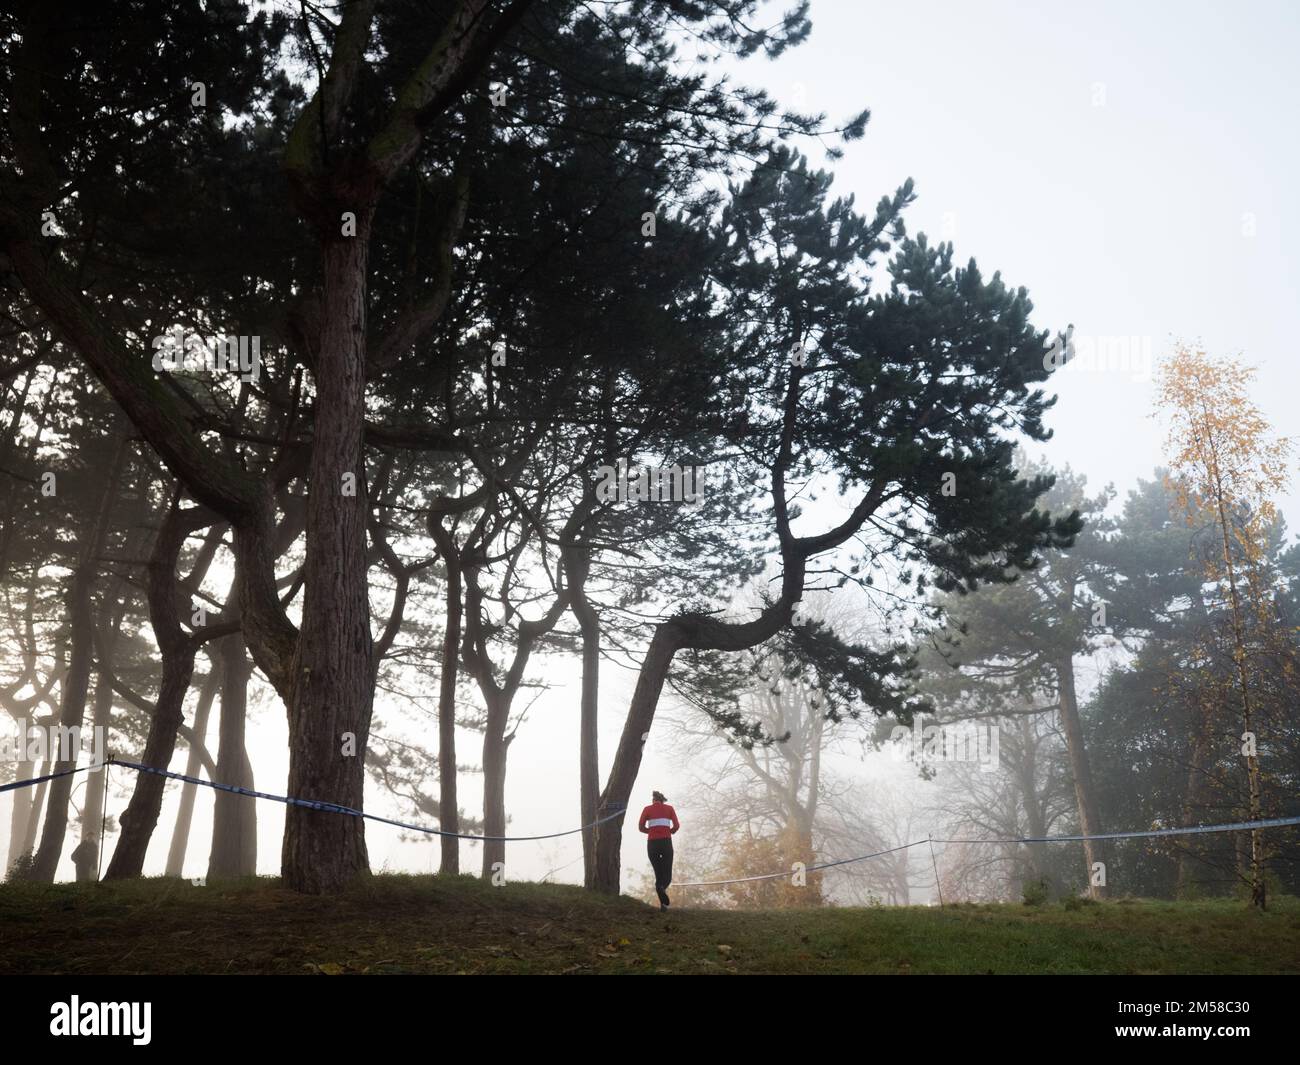 BRITISH ATHLETICS CROSS CHALLENGE. Sefton Park Liverpool 26.11.16. Runners compete in foggy conditions. Stock Photo